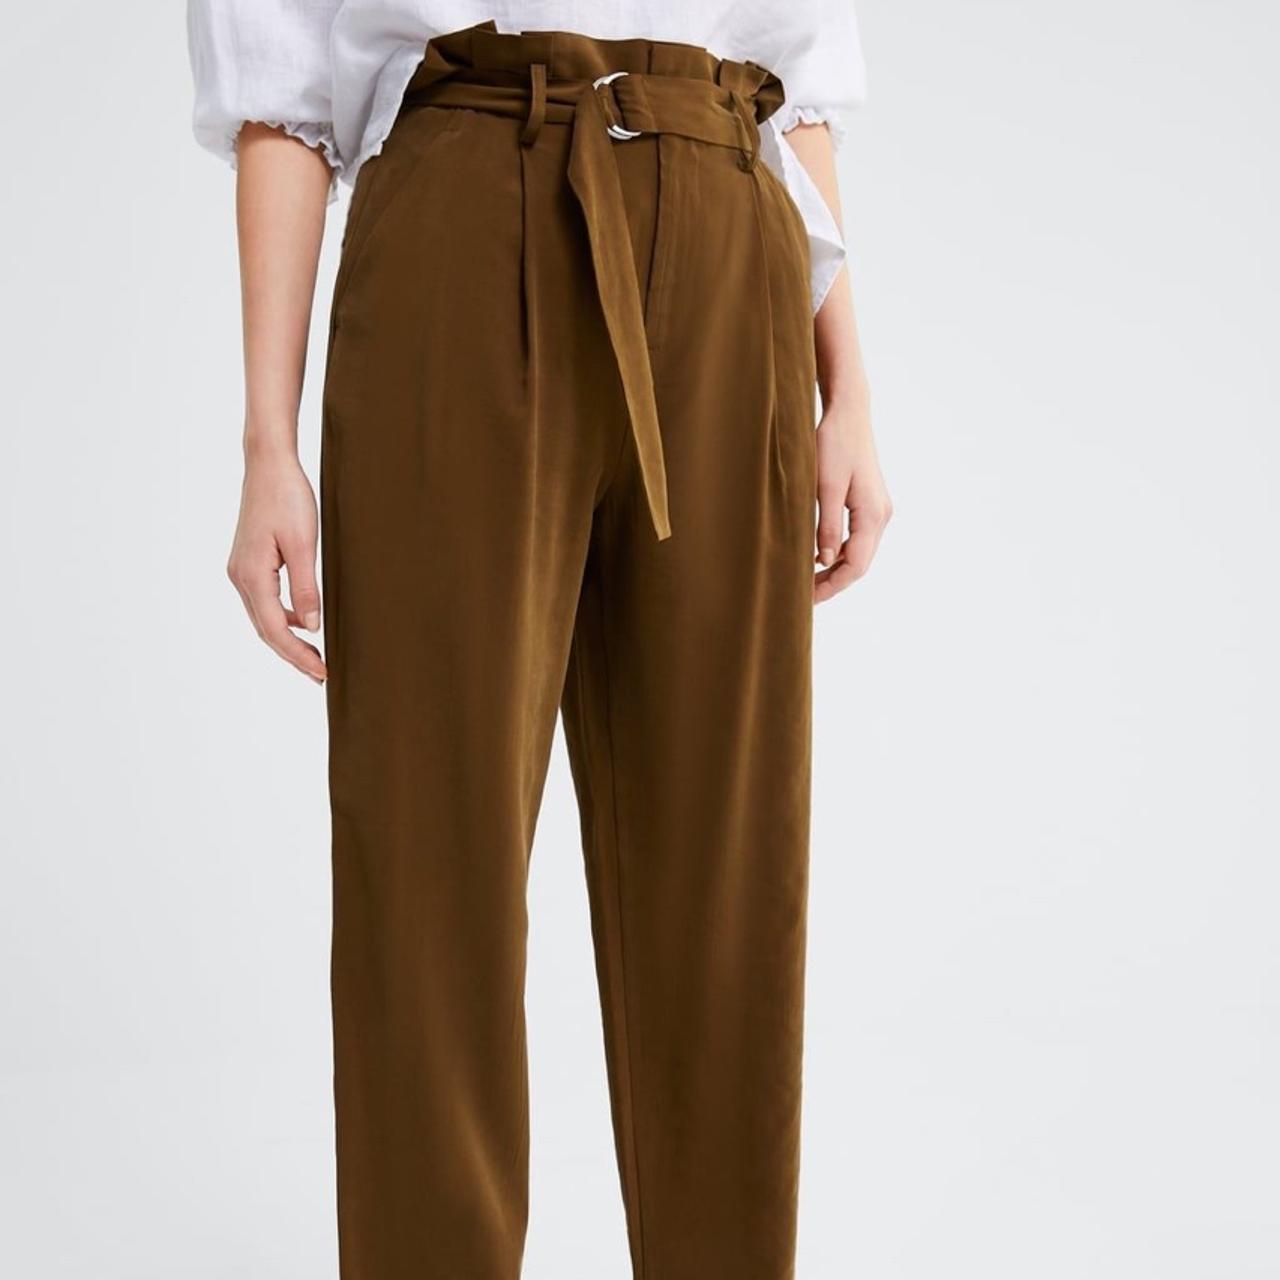 PAPERBAG TROUSERS WITH BELT  Light blue  ZARA India